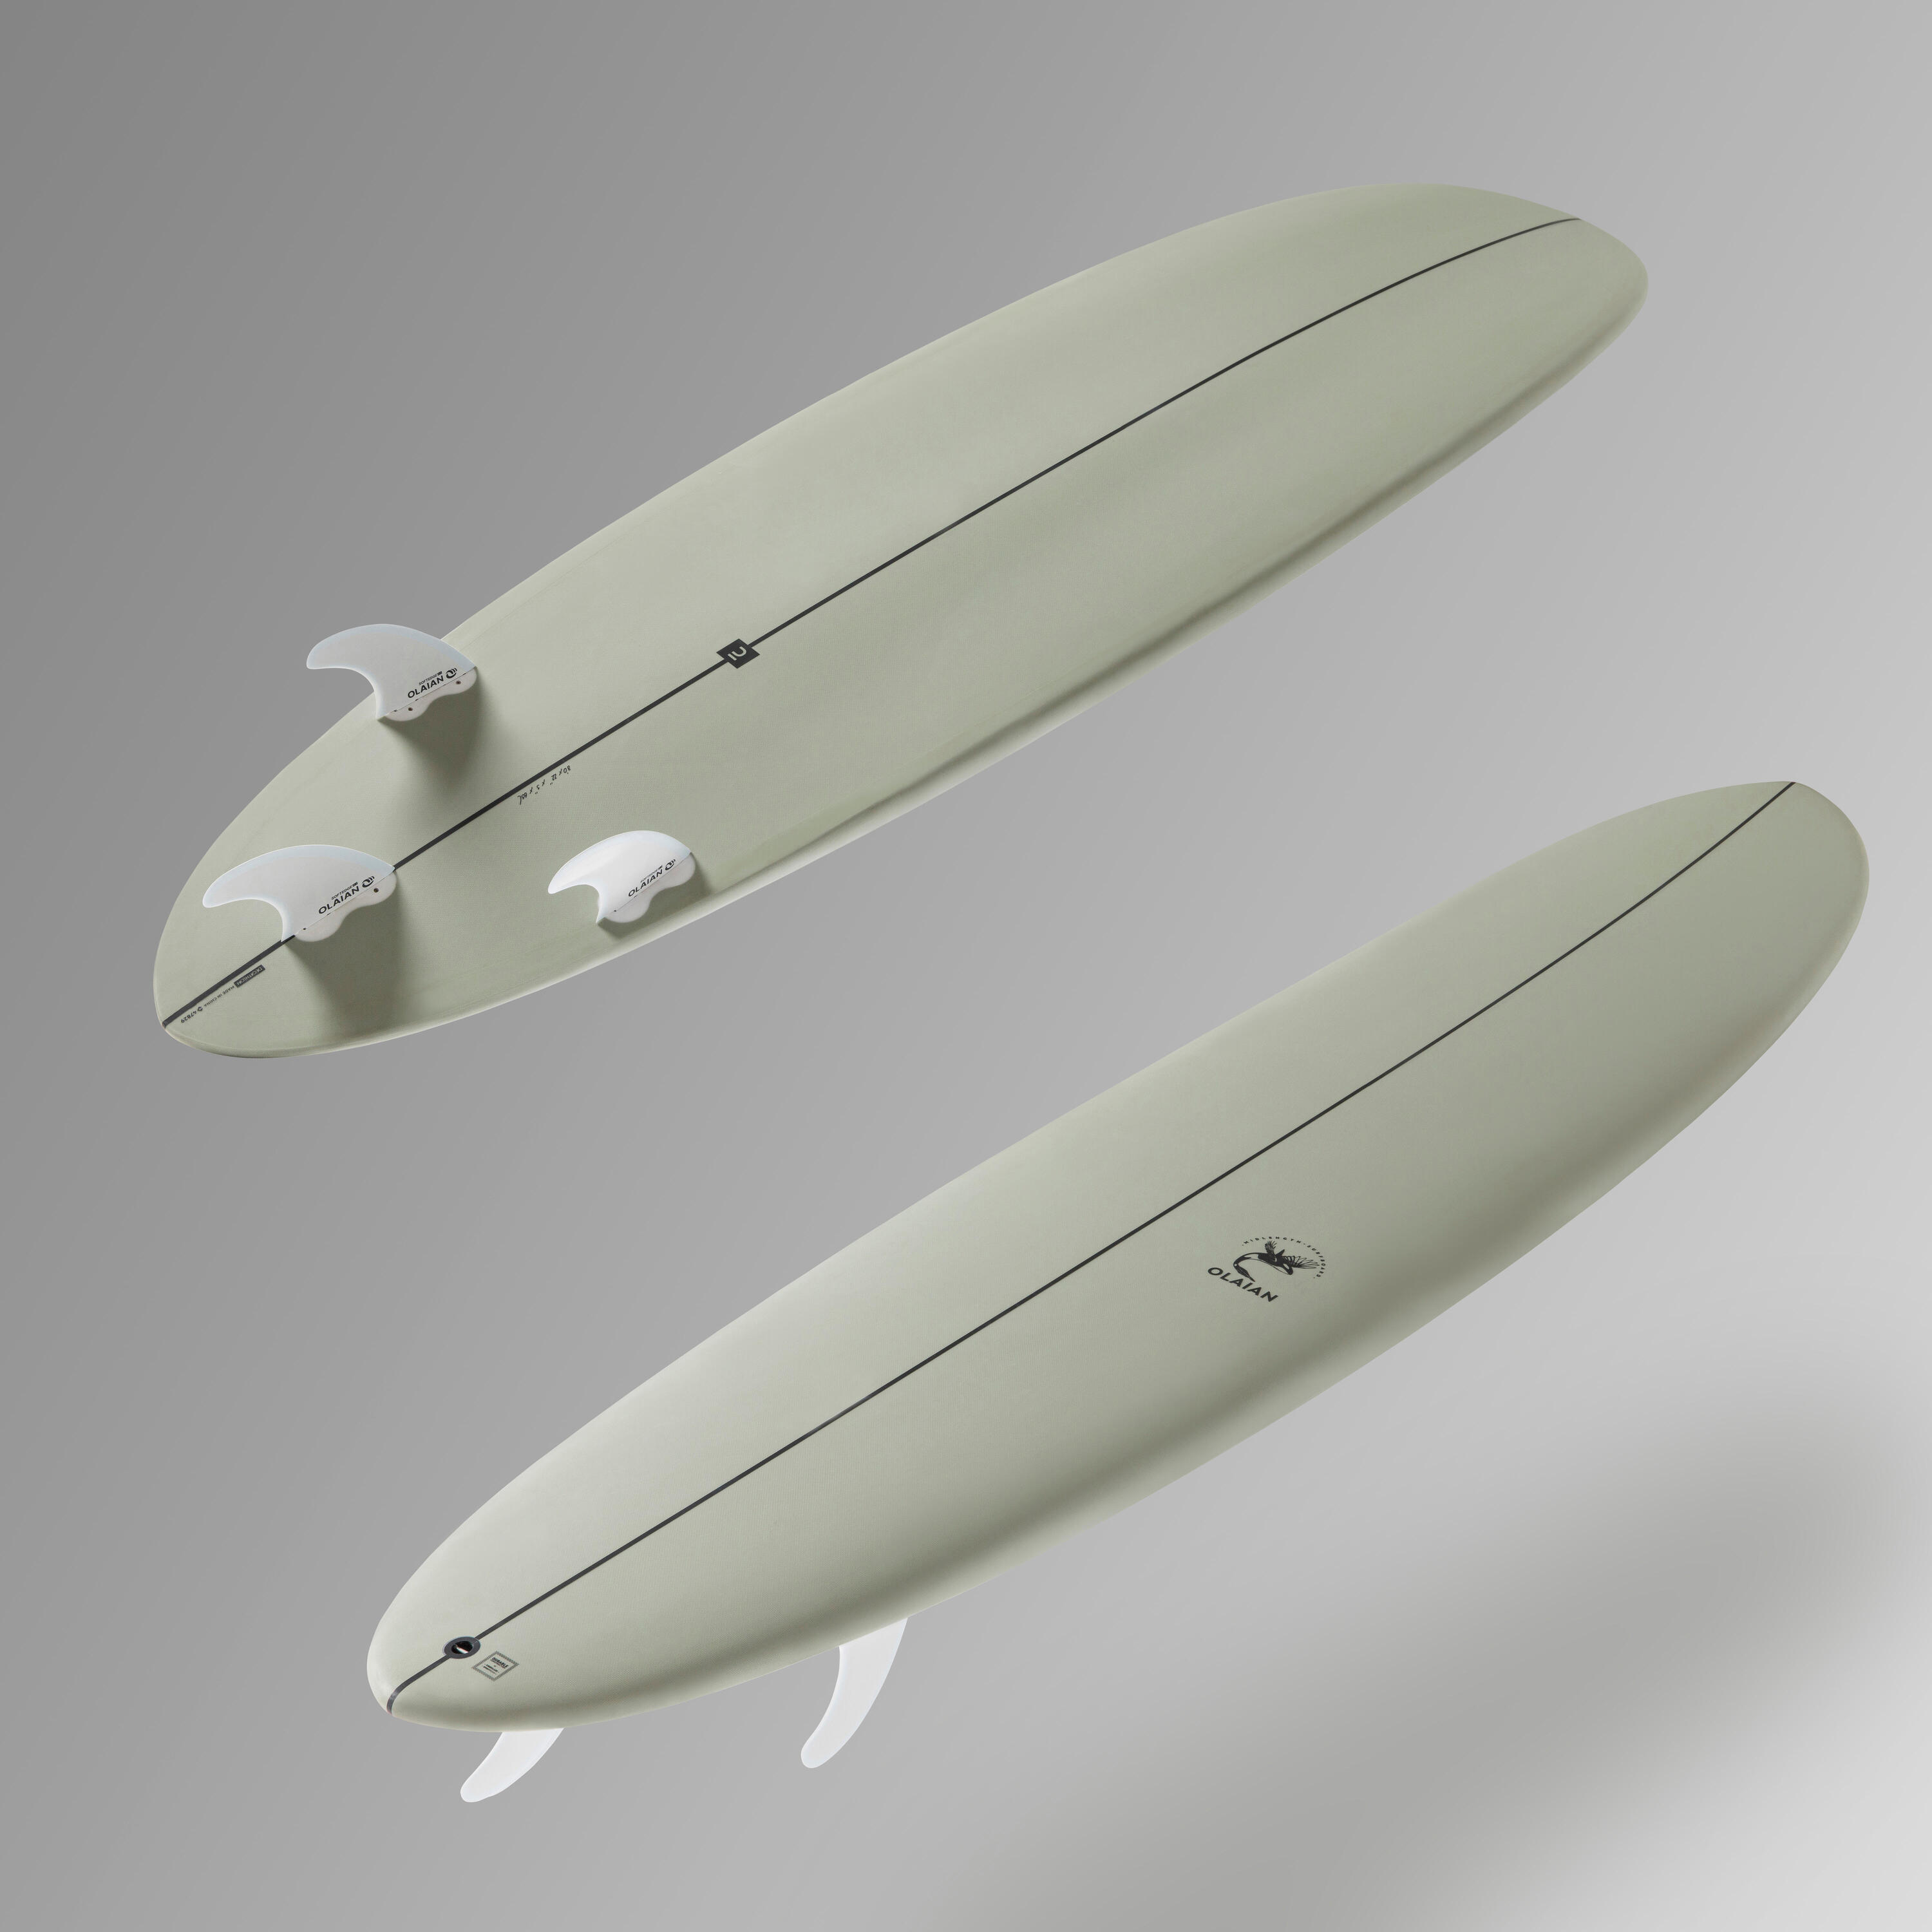 SURFBOARD 500 Hybrid 8' with 3 Fins. 7/16